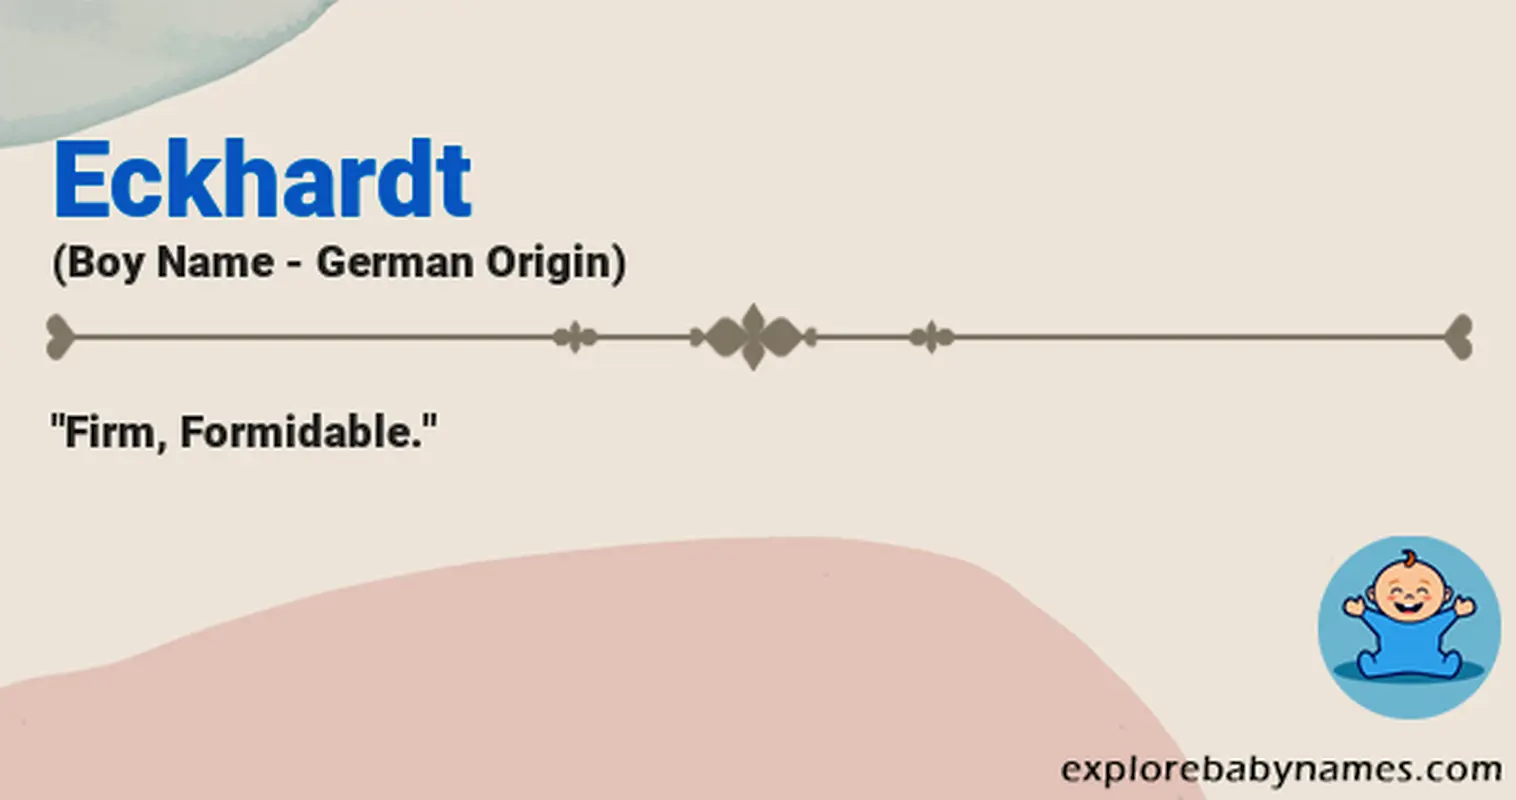 Meaning of Eckhardt